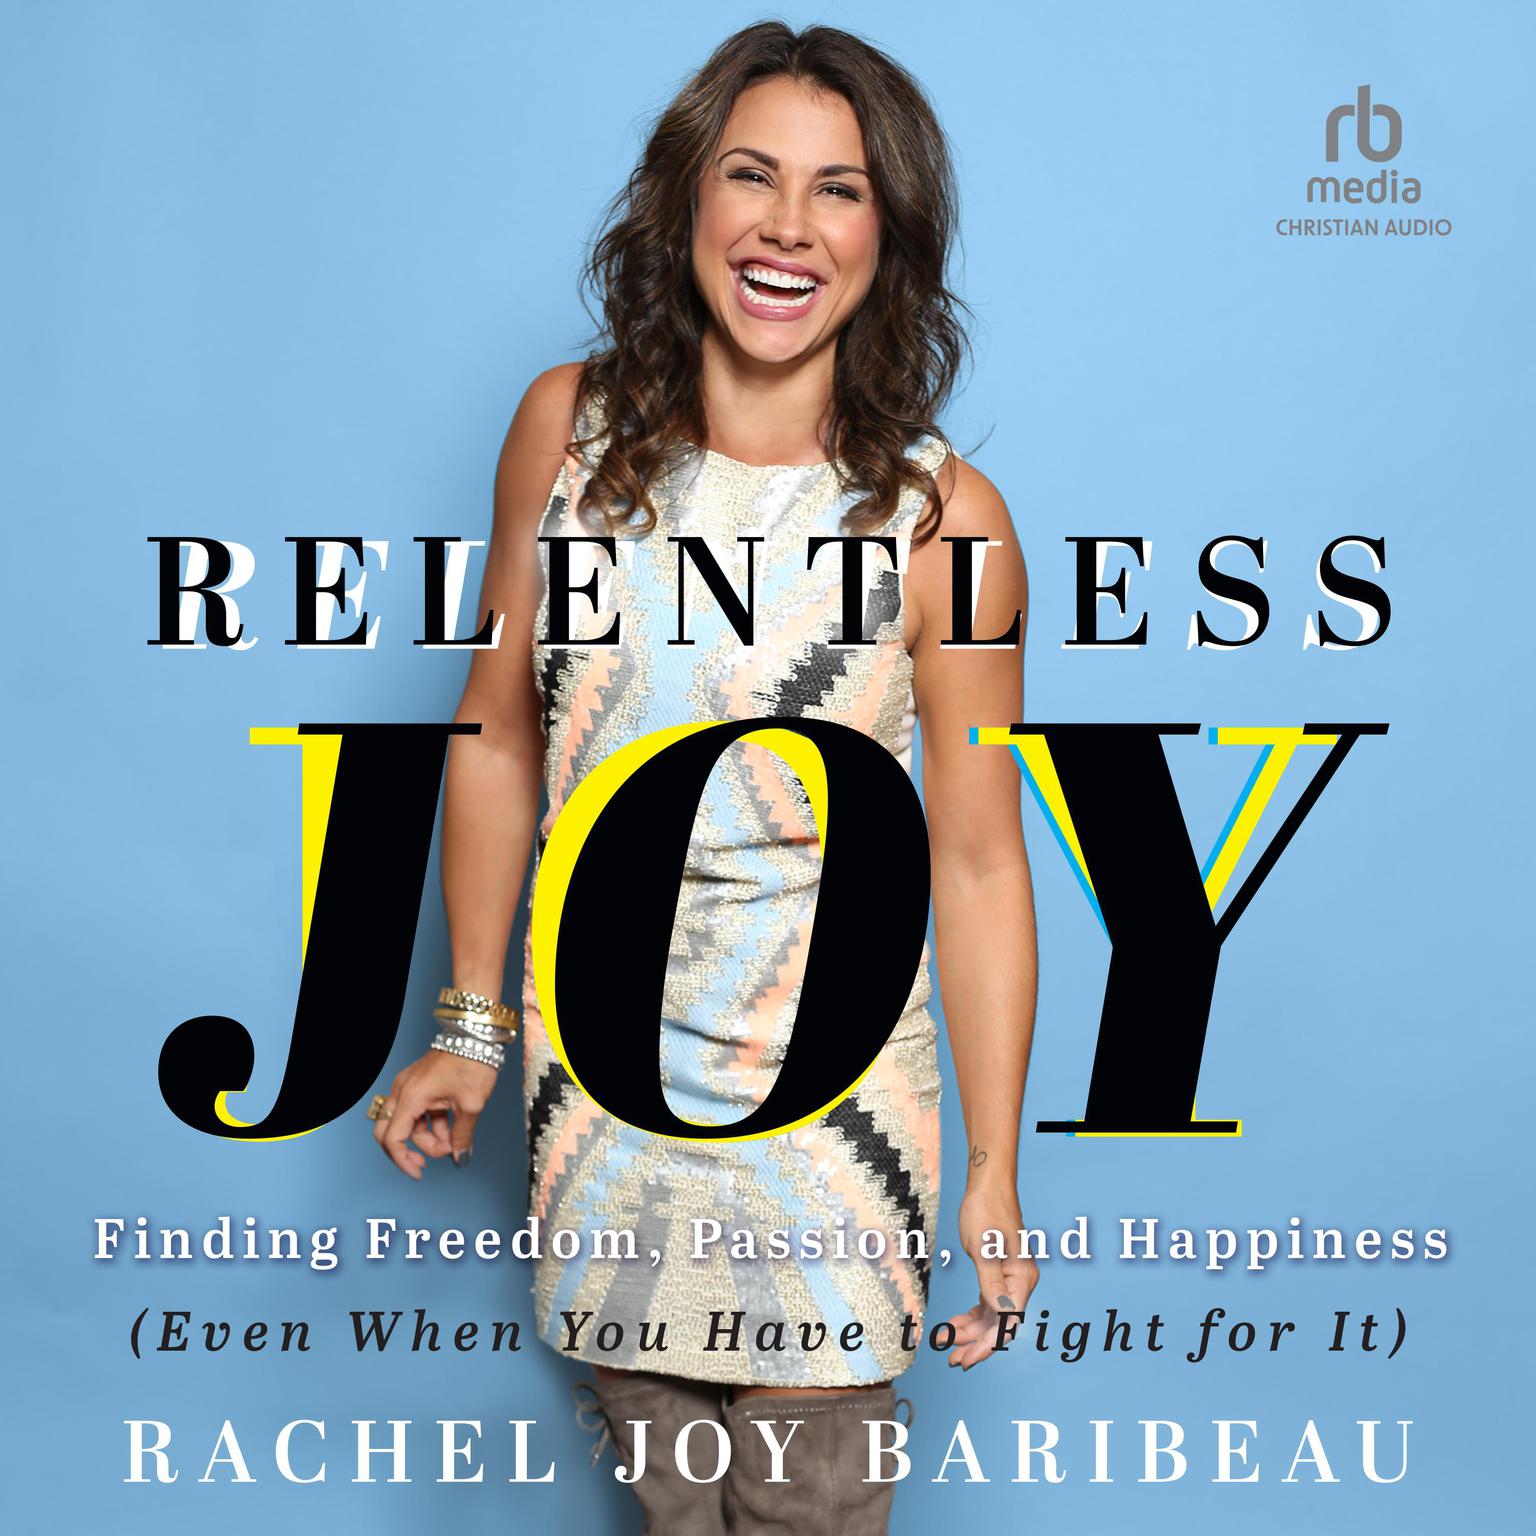 Relentless Joy: Finding Freedom, Passion, and Happiness (Even When You Have to Fight for It) Audiobook, by Rachel Joy Baribeau